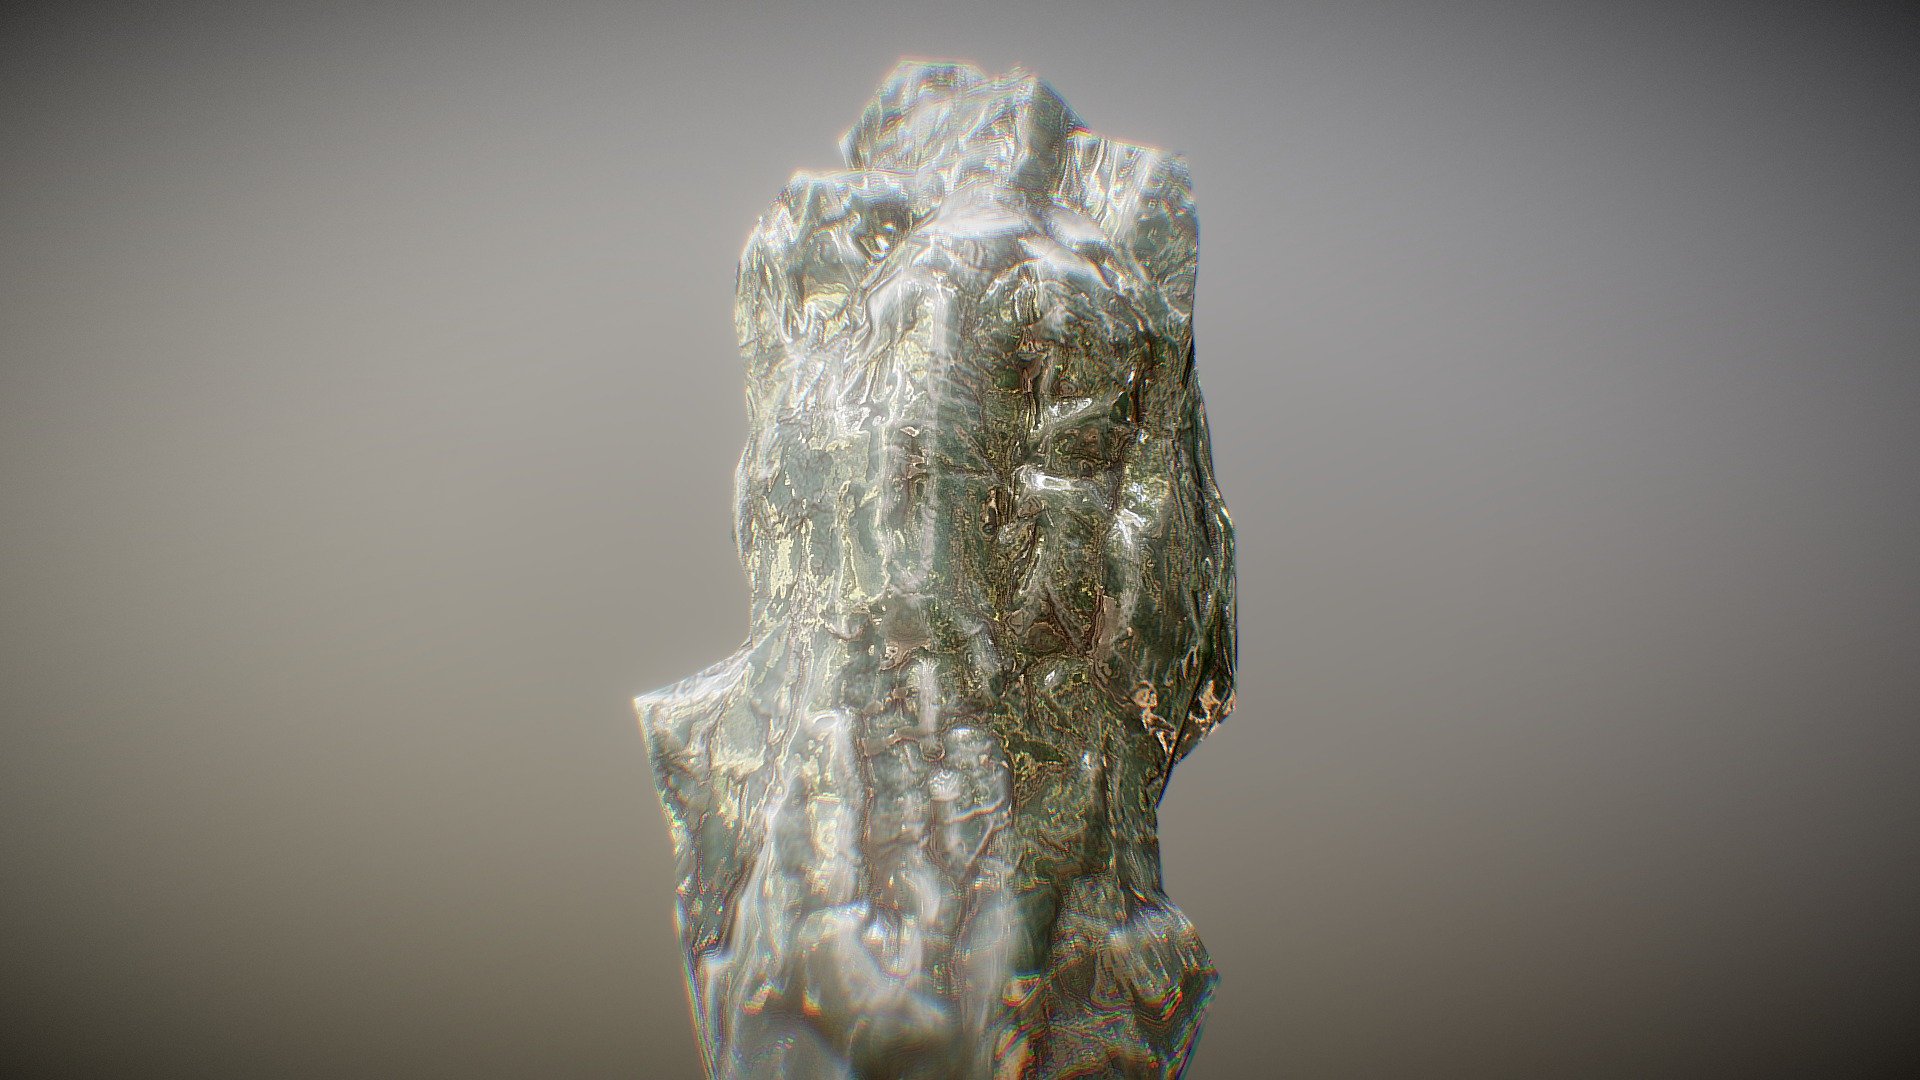 Icy Cliff Rock 6 lowPoly